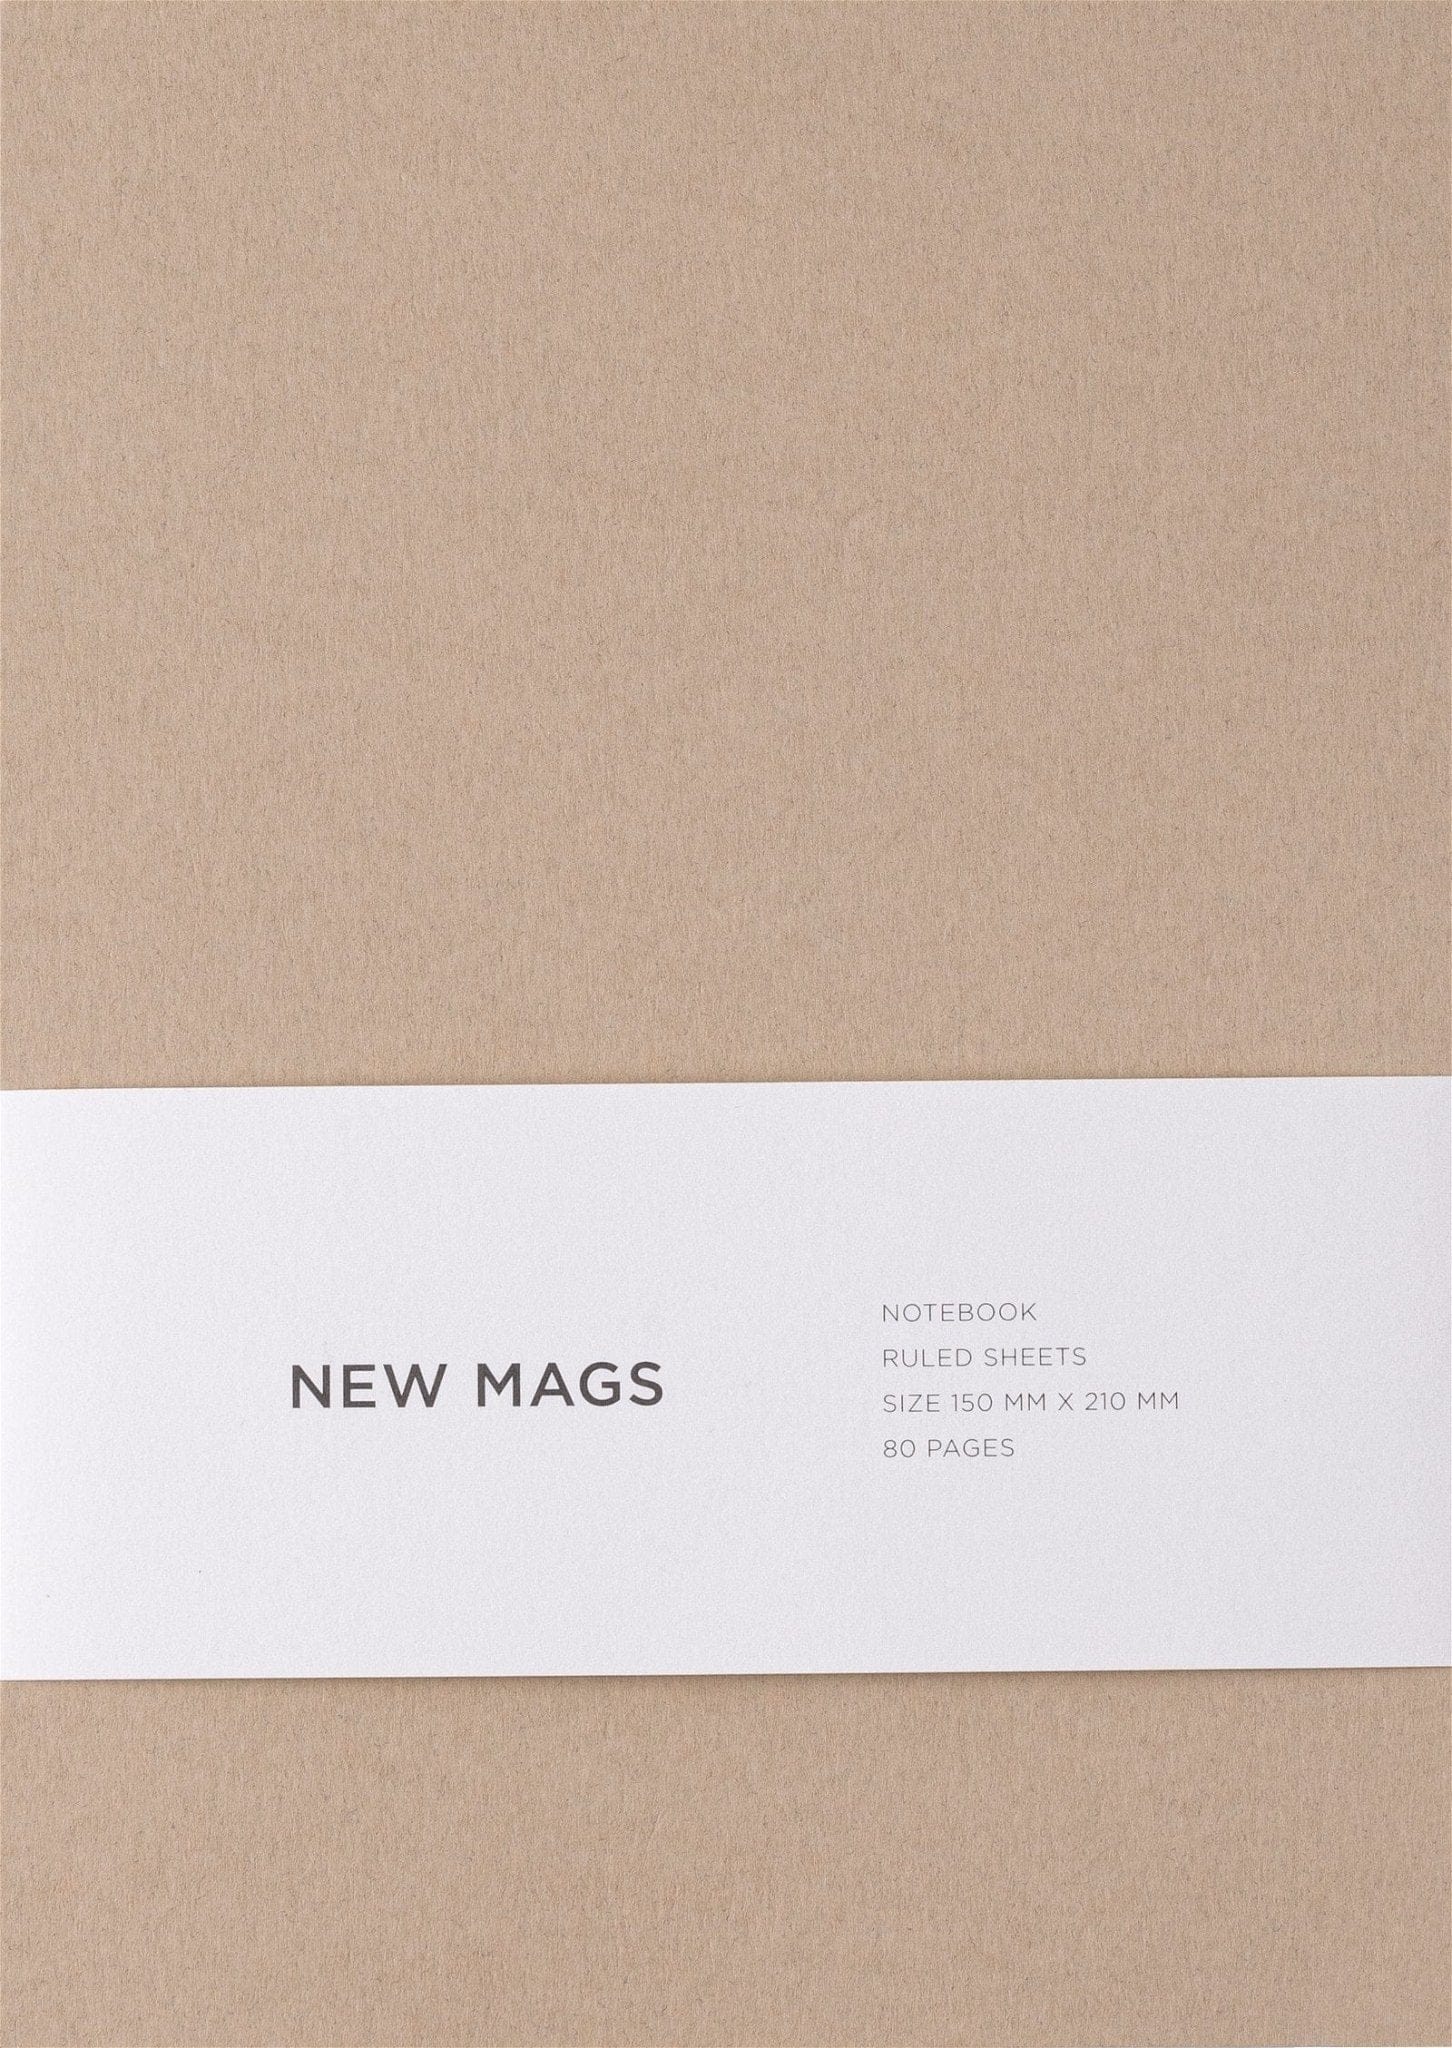 NewMags Agenda Notebook Sand - Softcover/Ruled, in Limba Engleza